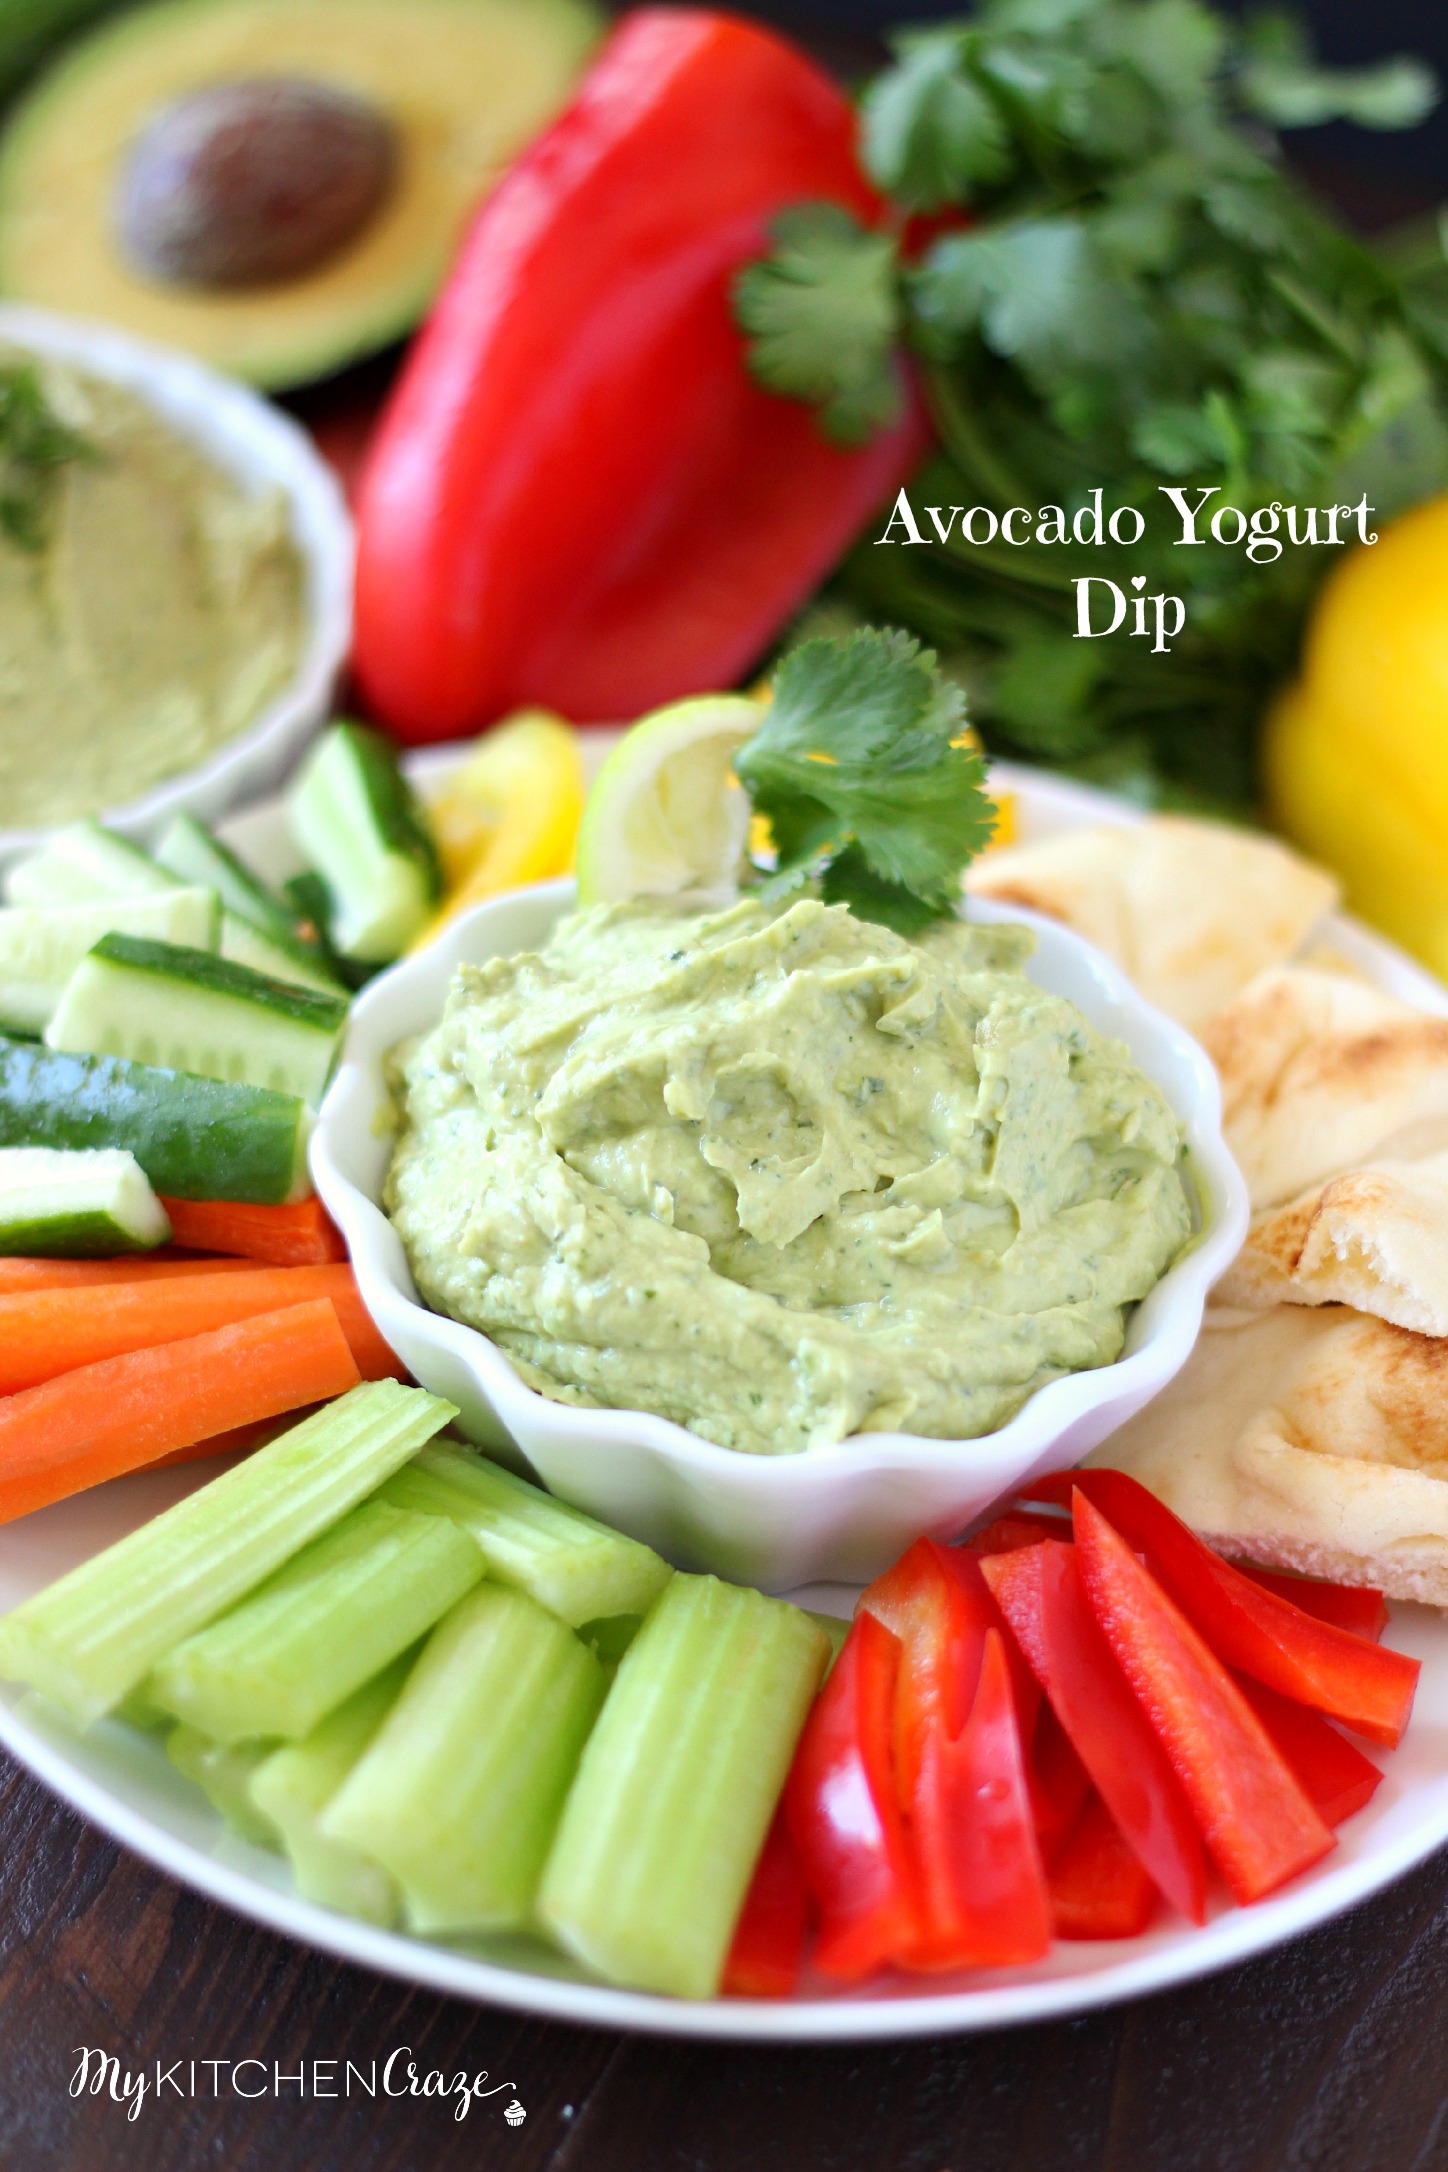 Avocado Yogurt Dip ~ mykitchencraze.com ~ Perfect for all sorts of vegetables and crackers. This dip needs to be at your next party!